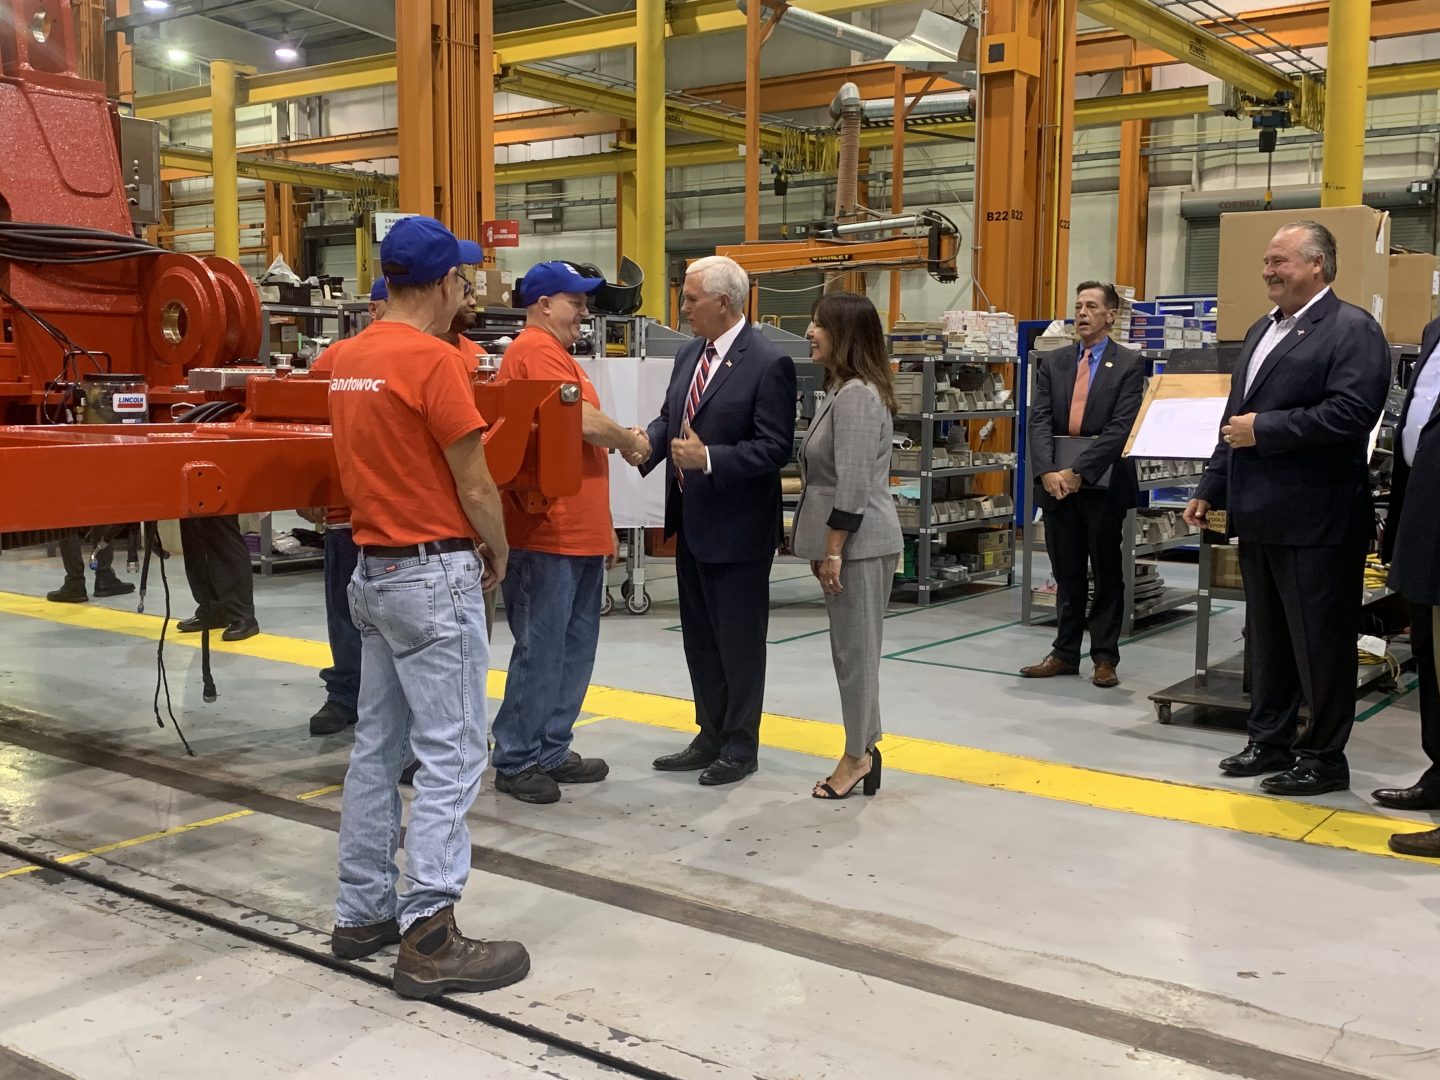 Vice President Mike Pence got a tour of a crane manufacturing facility in Pennsylvania Thursday, Aug. 1, 2019.